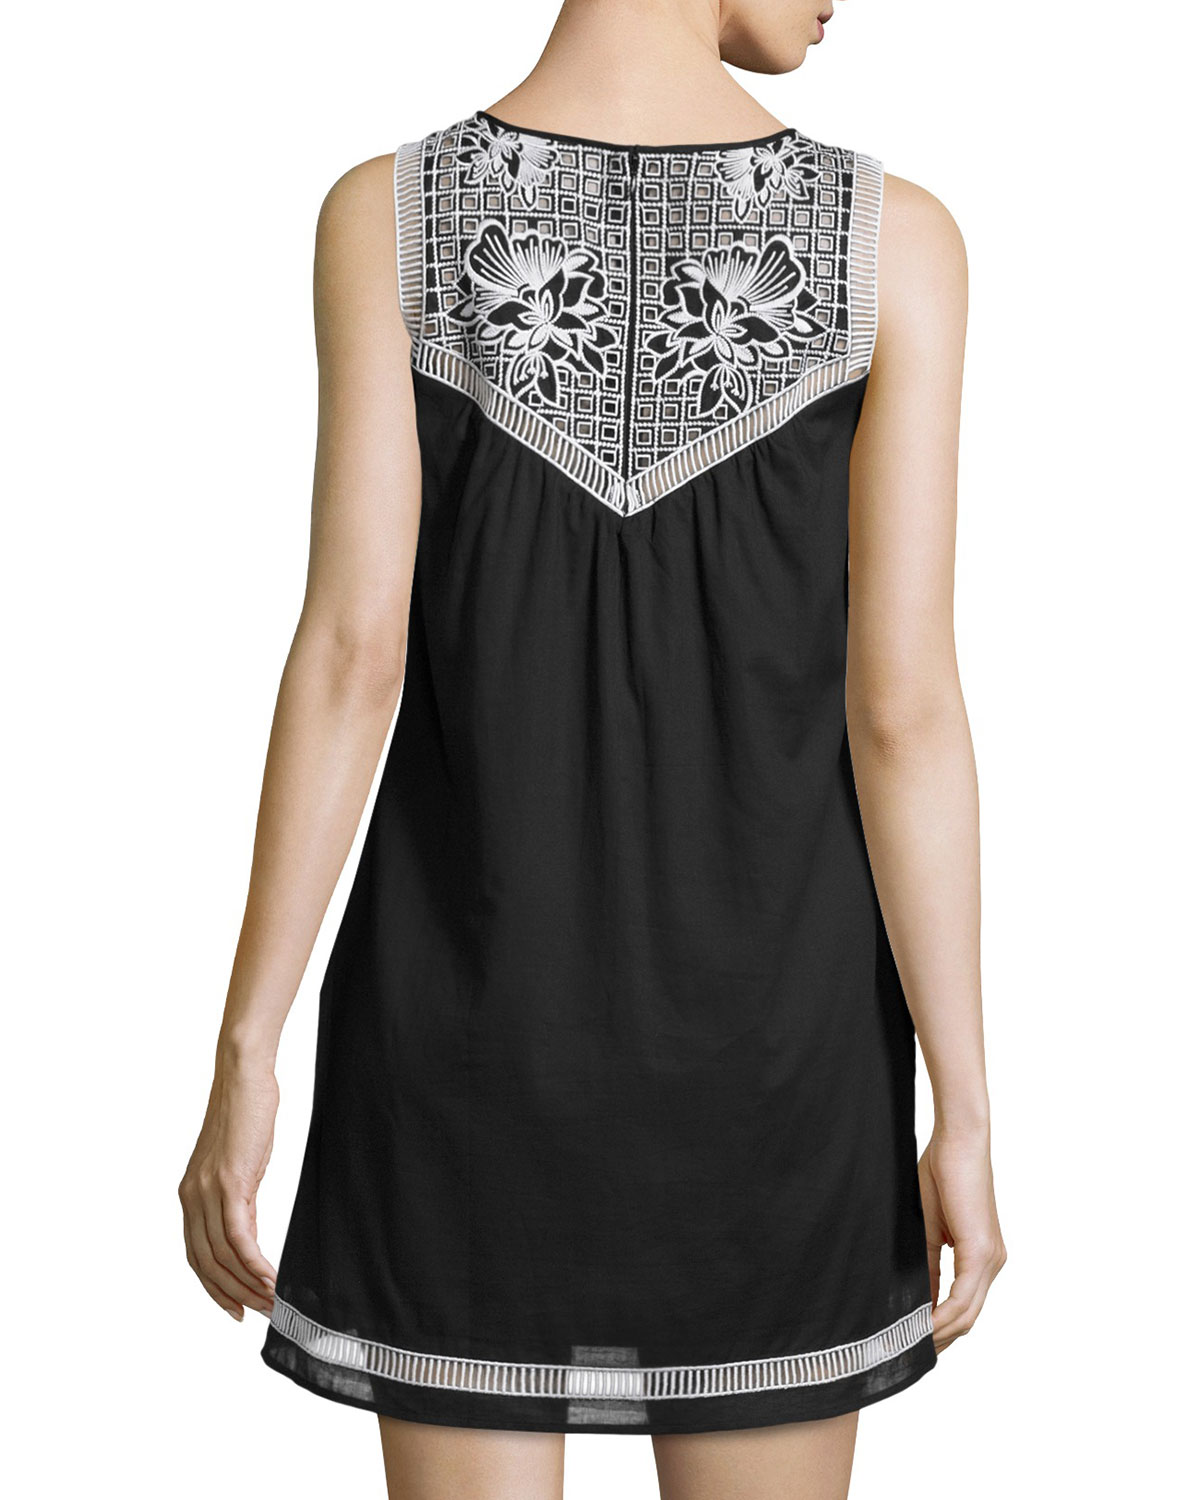 Hopewell Embroidered Dress, Black/Ivory